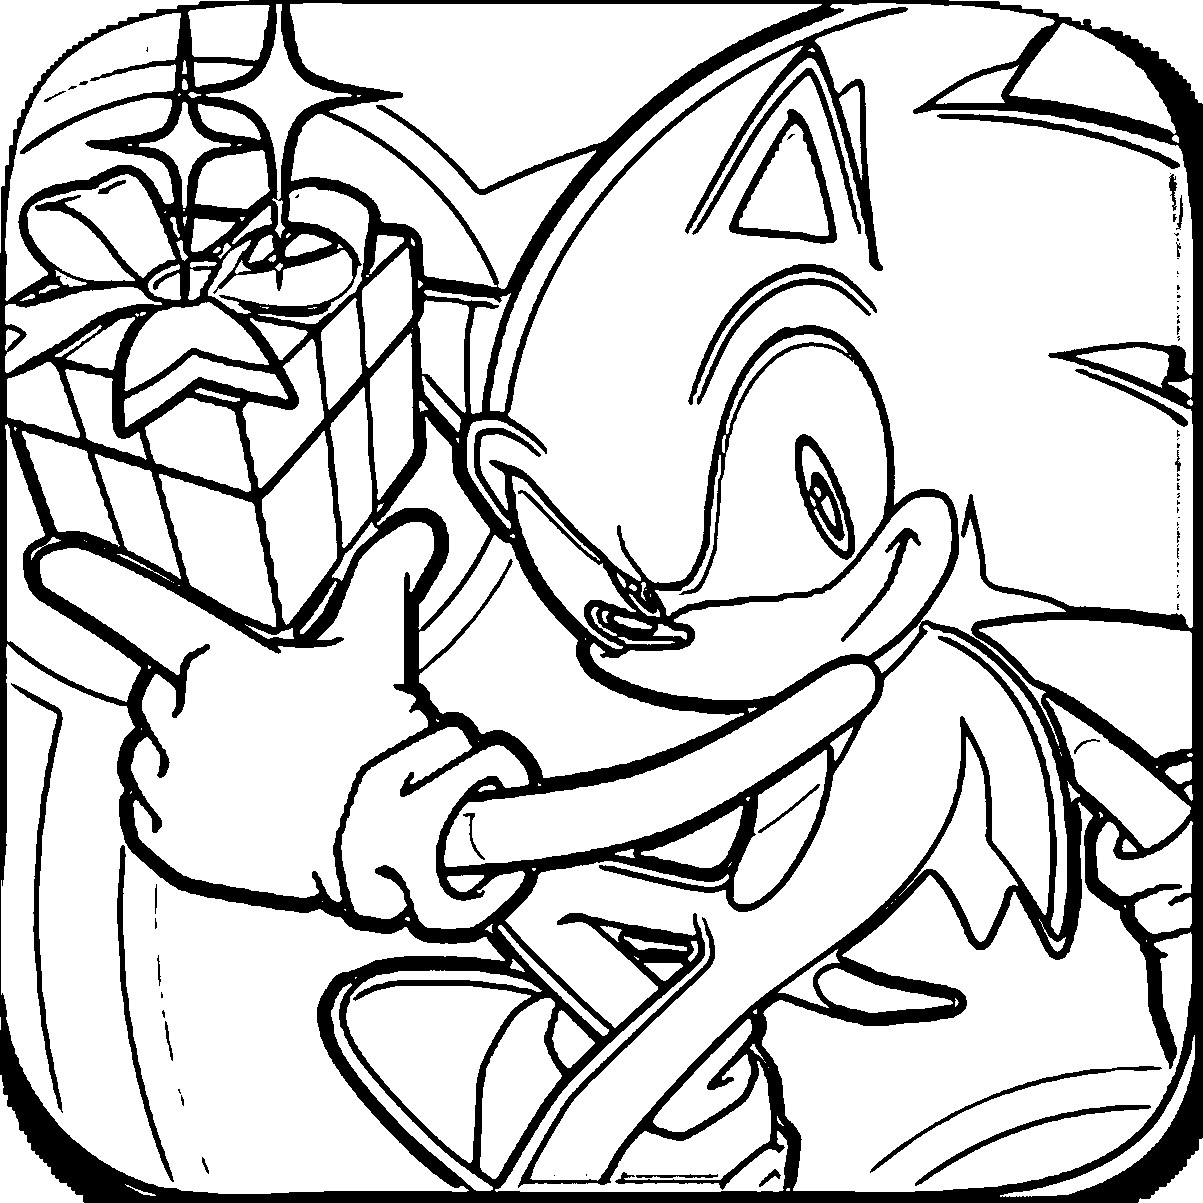 Sonic The Hedgehog Coloring Pages
 Sonic The Hedgehog Coloring Pages